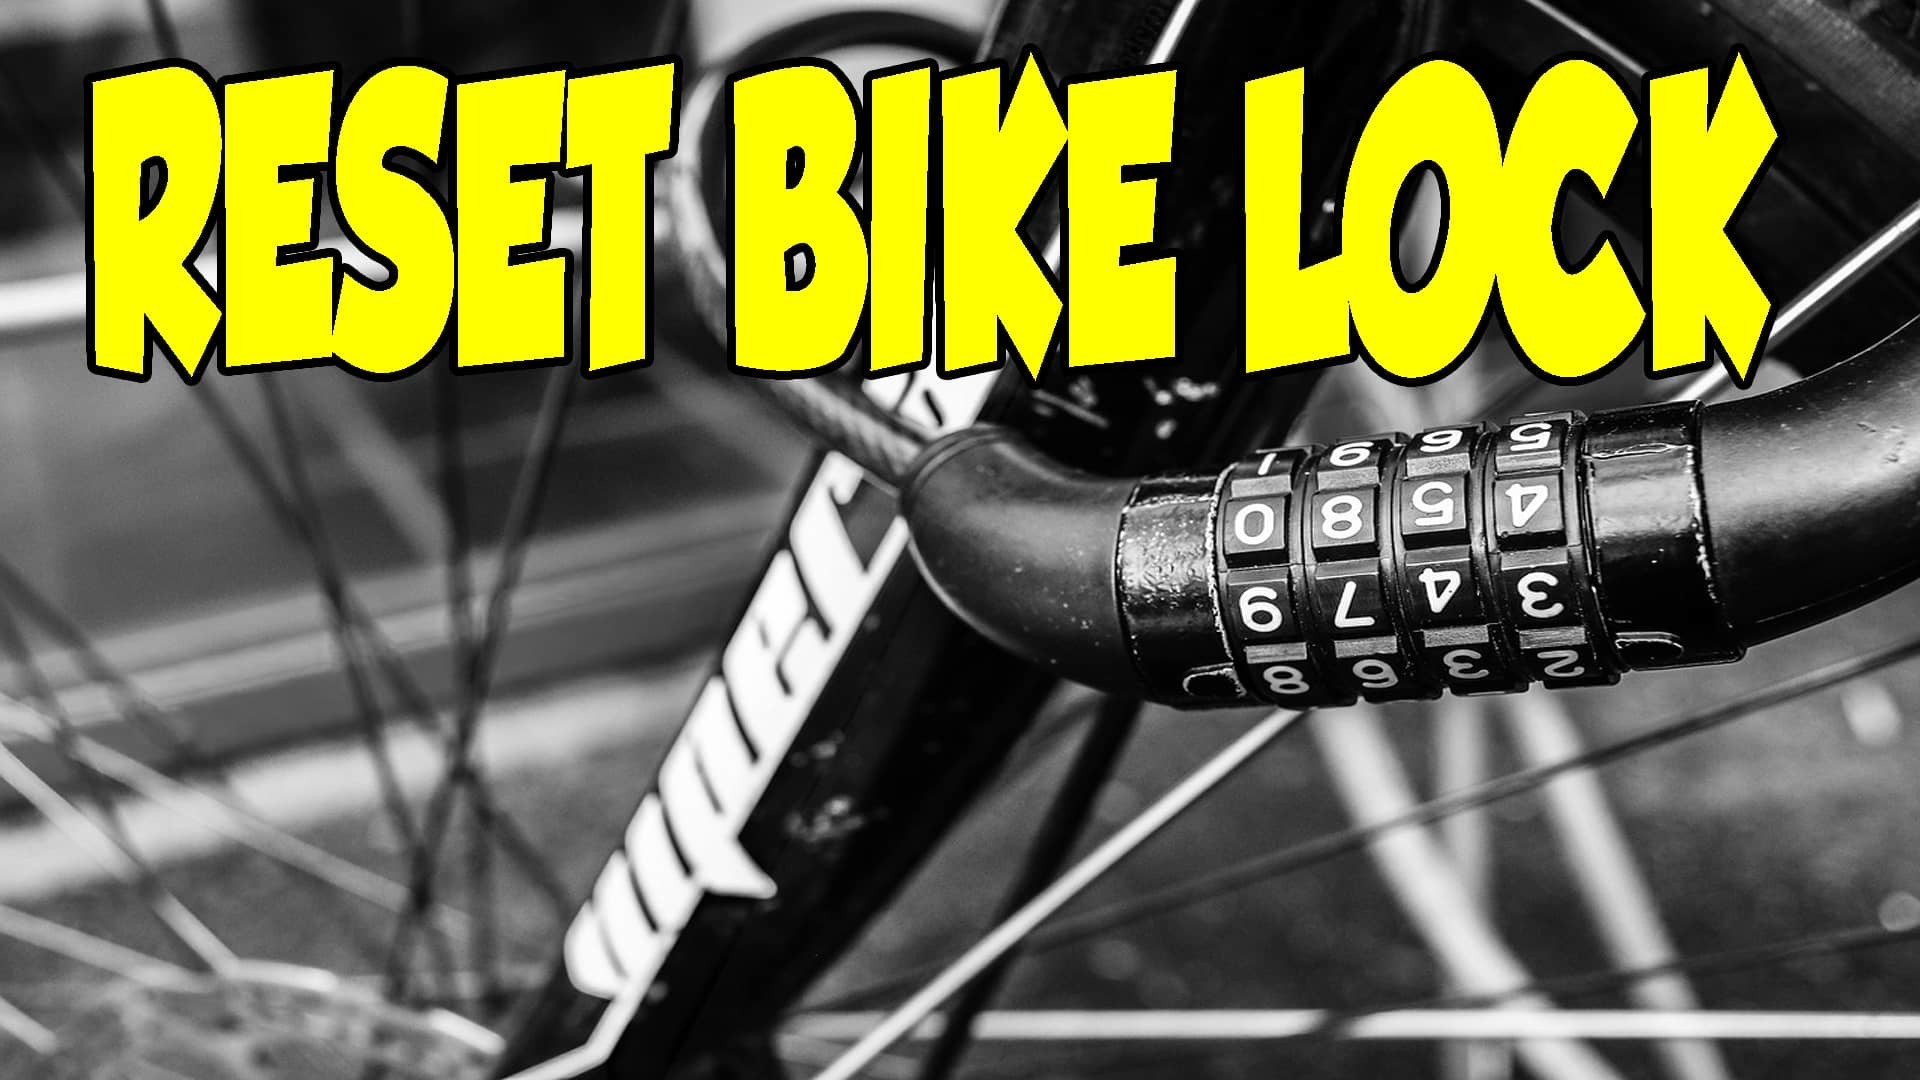 How To Reset A Bike Lock With Letters Chooserly